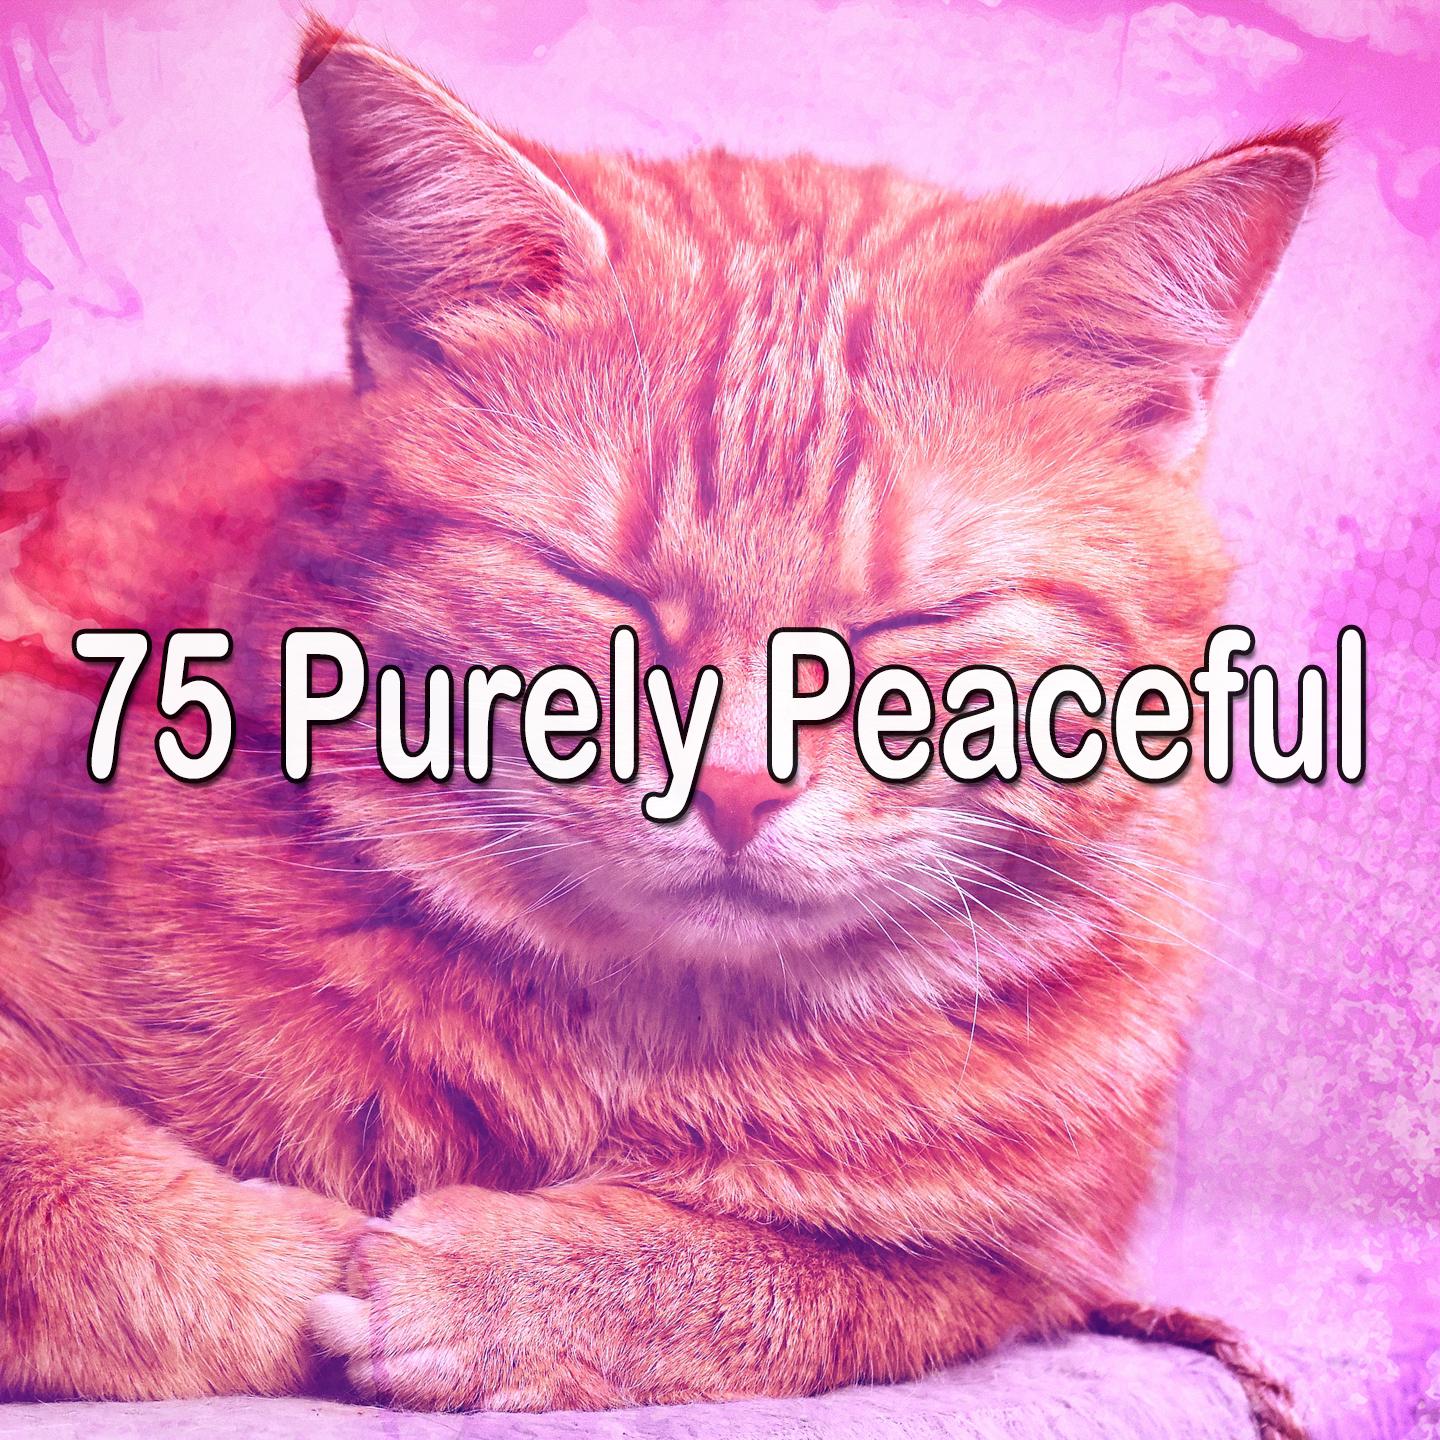 75 Purely Peaceful